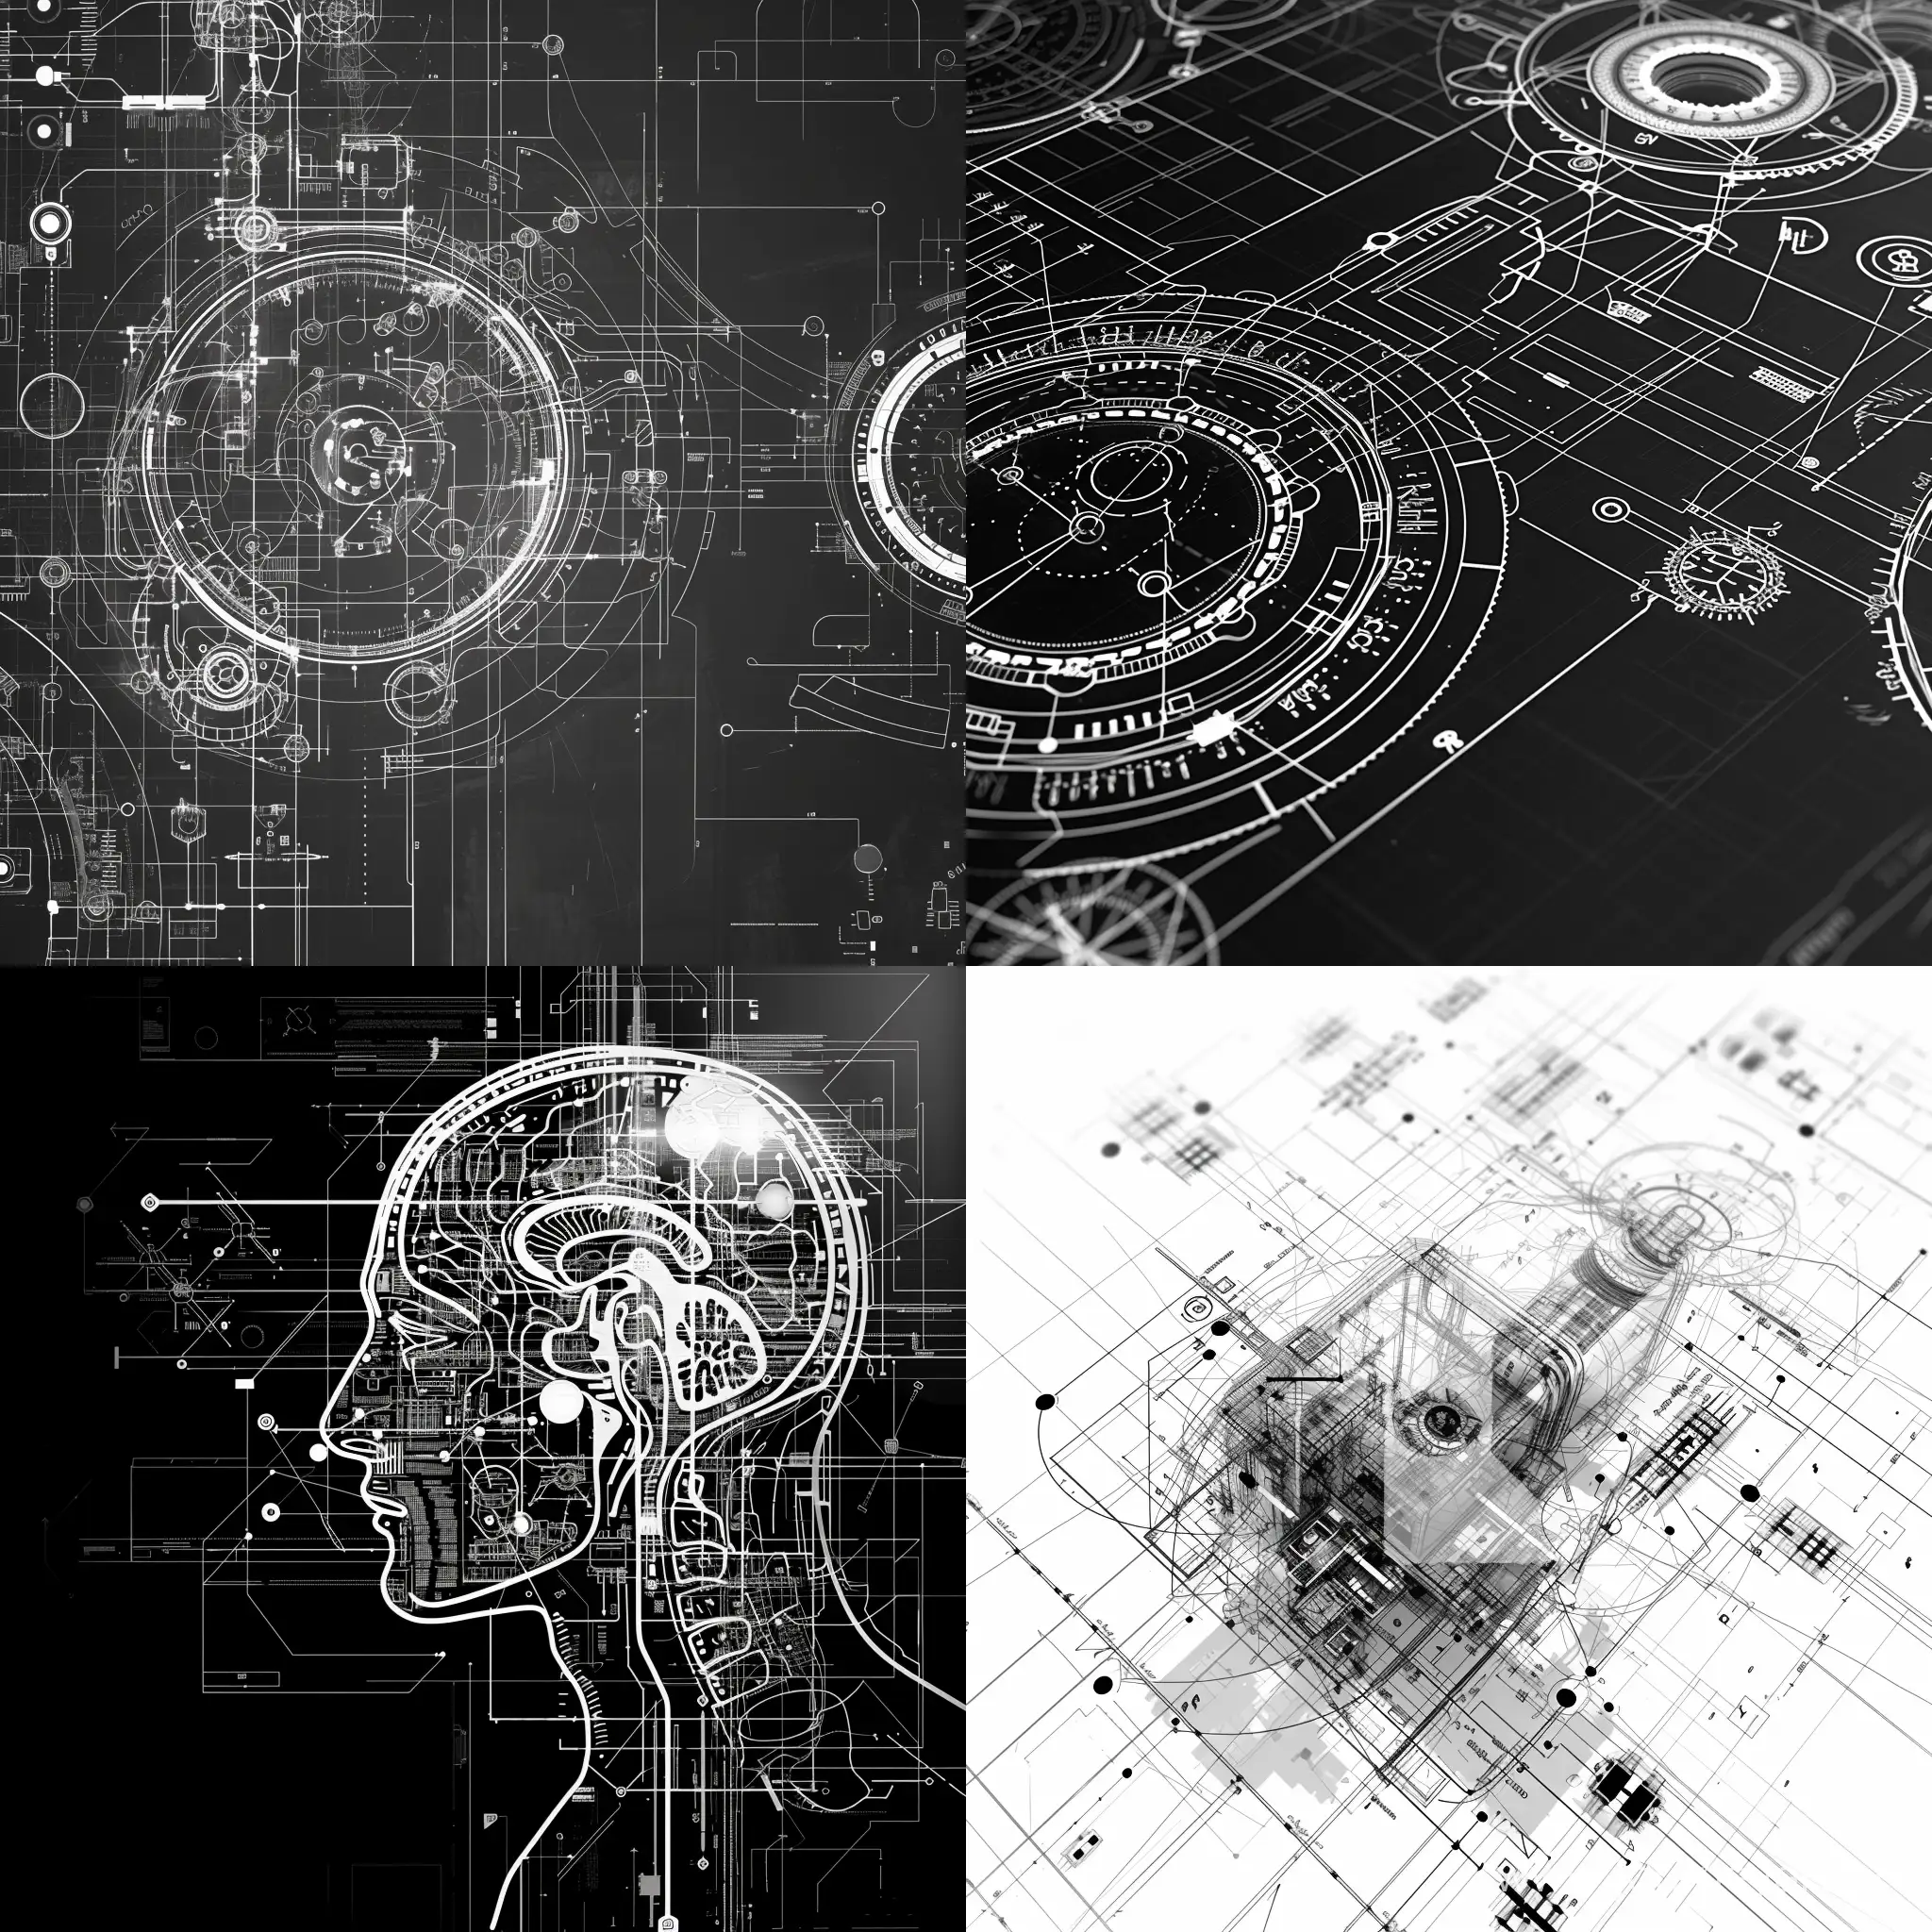 flat graphic icon, engineering blueprint, sketch, sketch in style of davinci, futoristic, digital,do a visualization on this text: AI-Enabled, Data-Driven Problem Solving
Eliminate guesswork and make informed  decisions with data insights you can rely on  to solve even the most complex challenges., black and white, Ai text